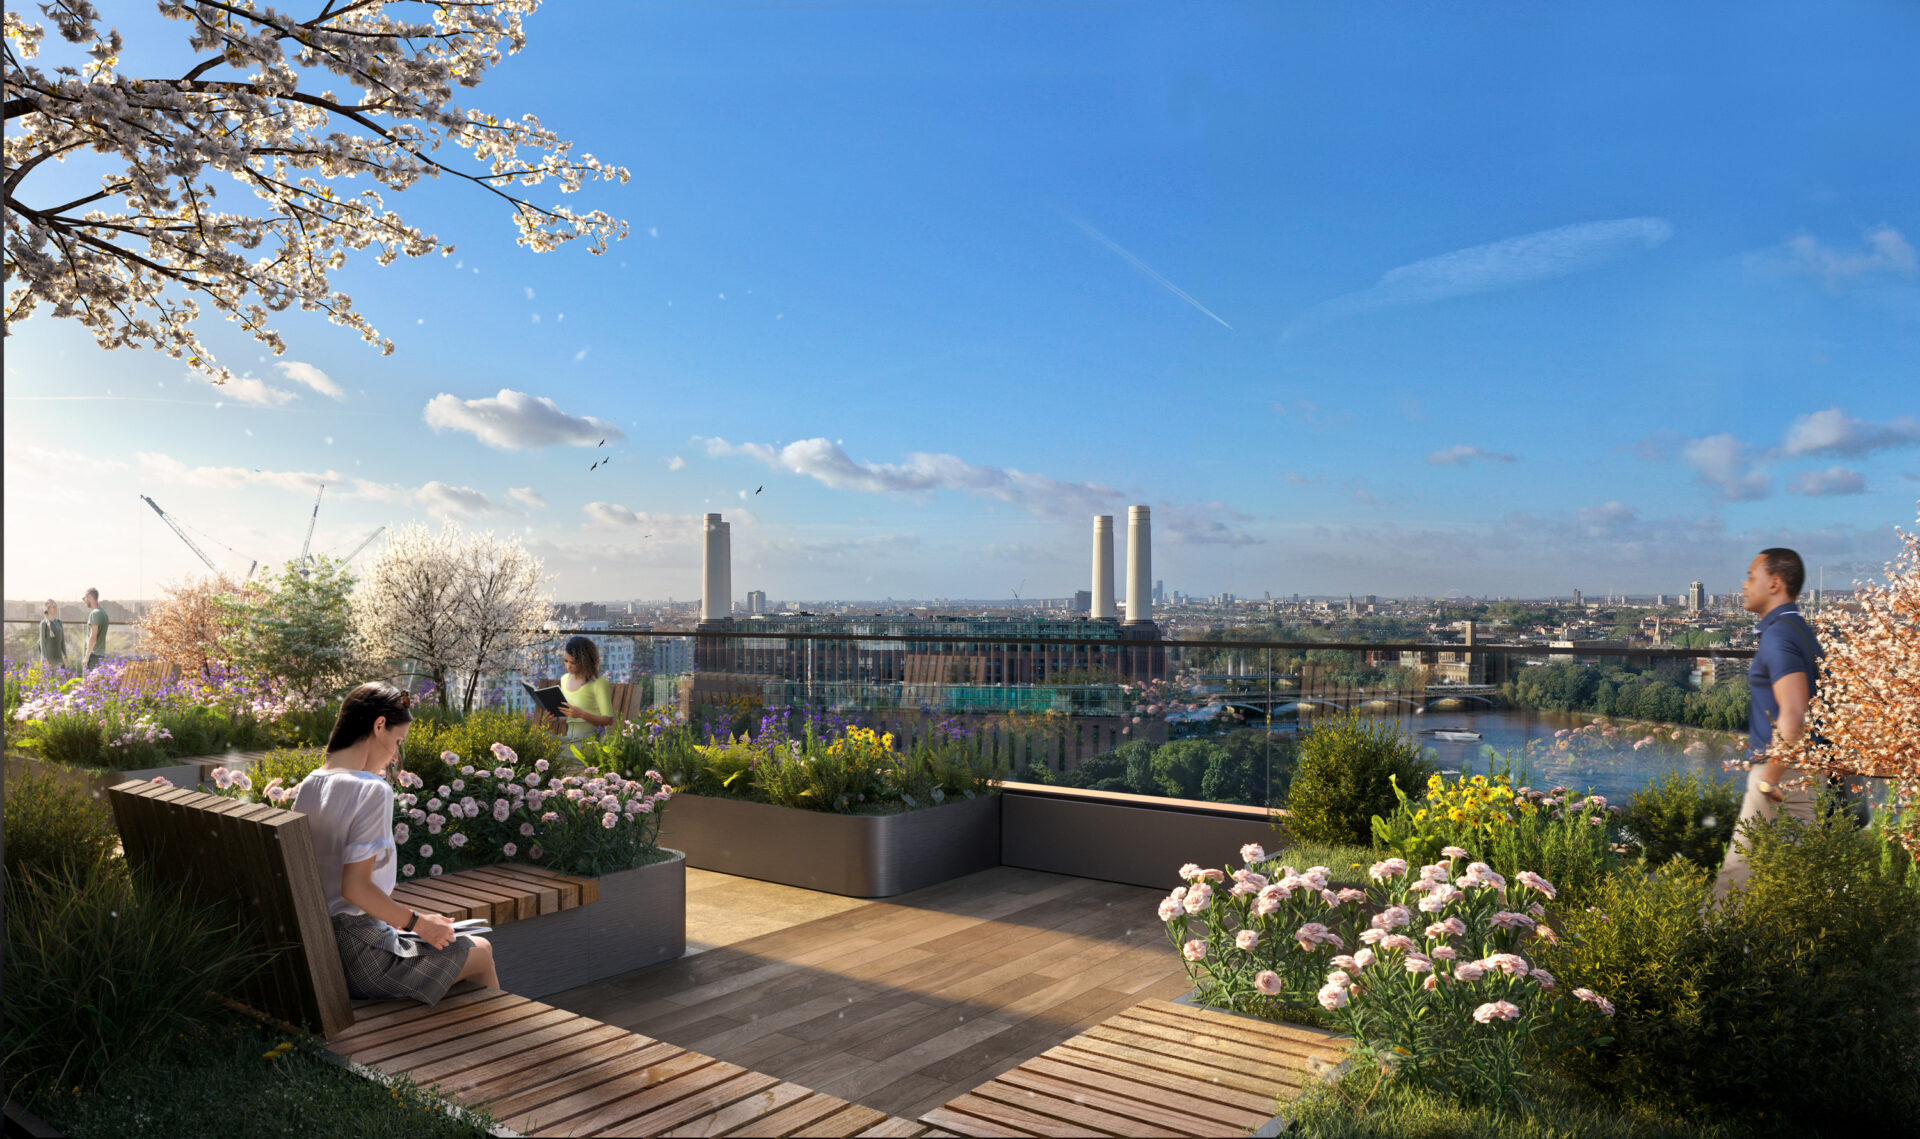 AN ARTIST’S IMPRESSION OF THE VIEW SOUTH THE BUILDING FROM THE 12TH FLOOR TERRACE